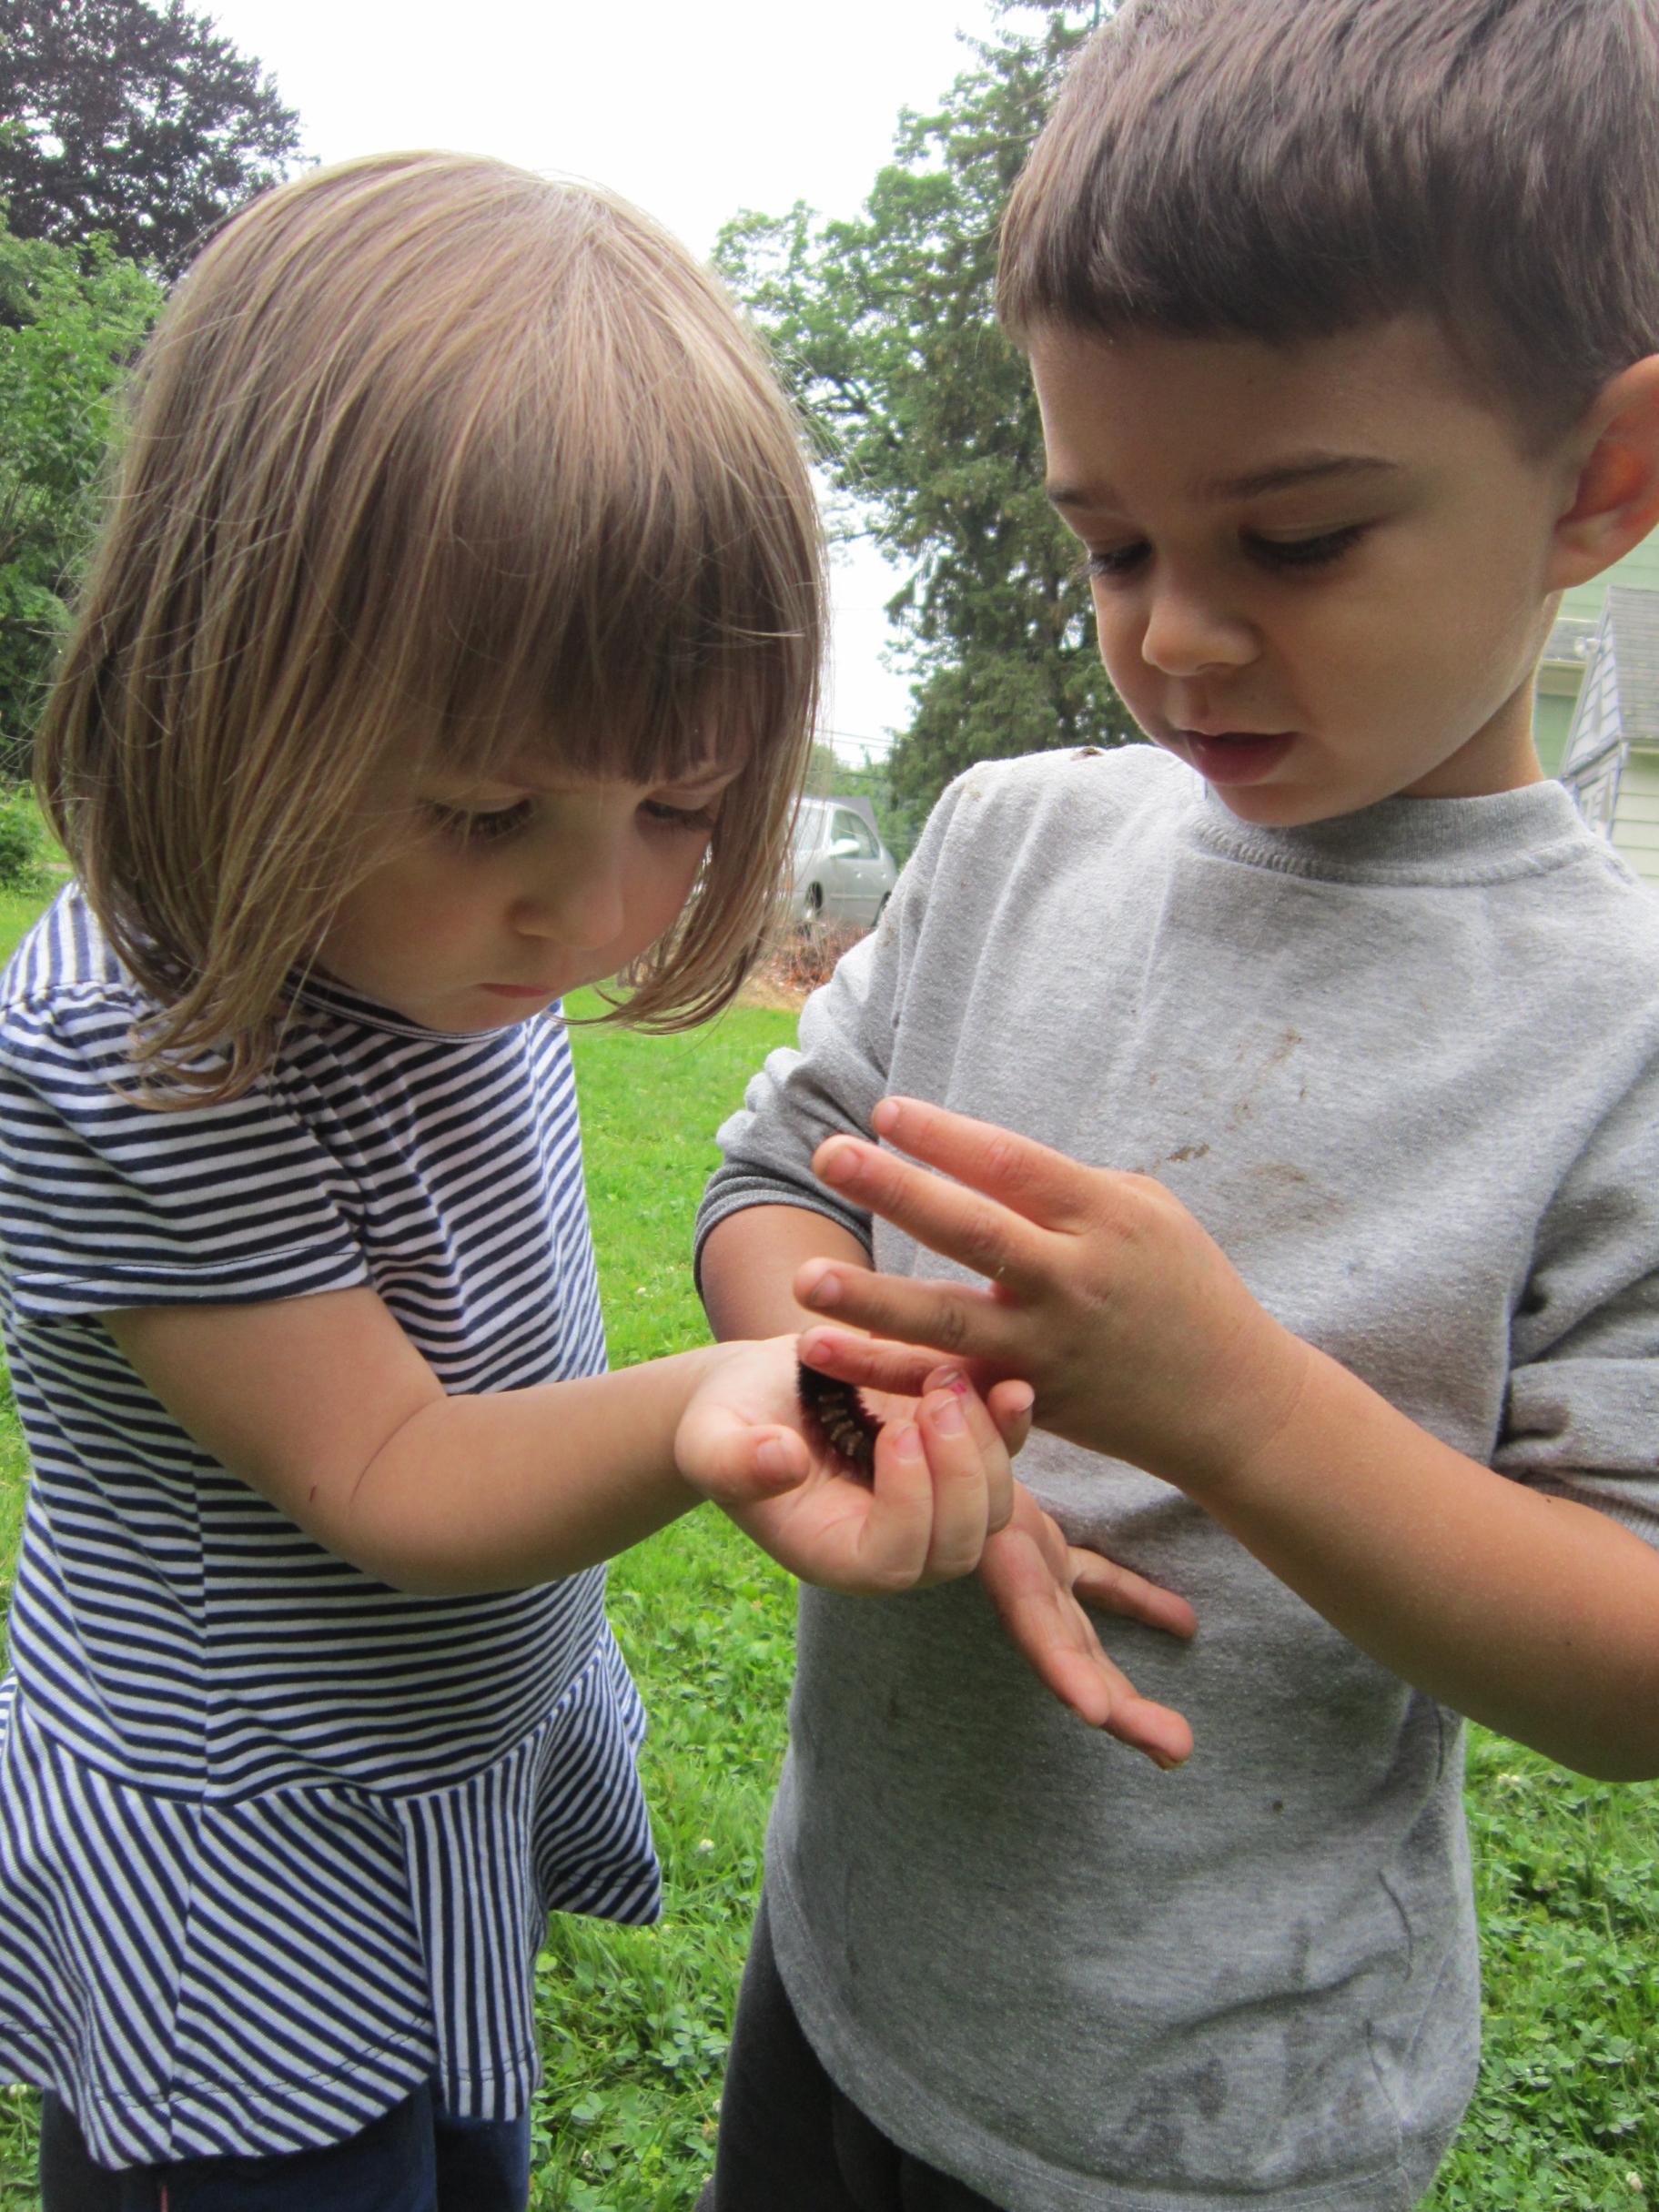 a young boy gives a big, fuzzy caterpillar to a young girl